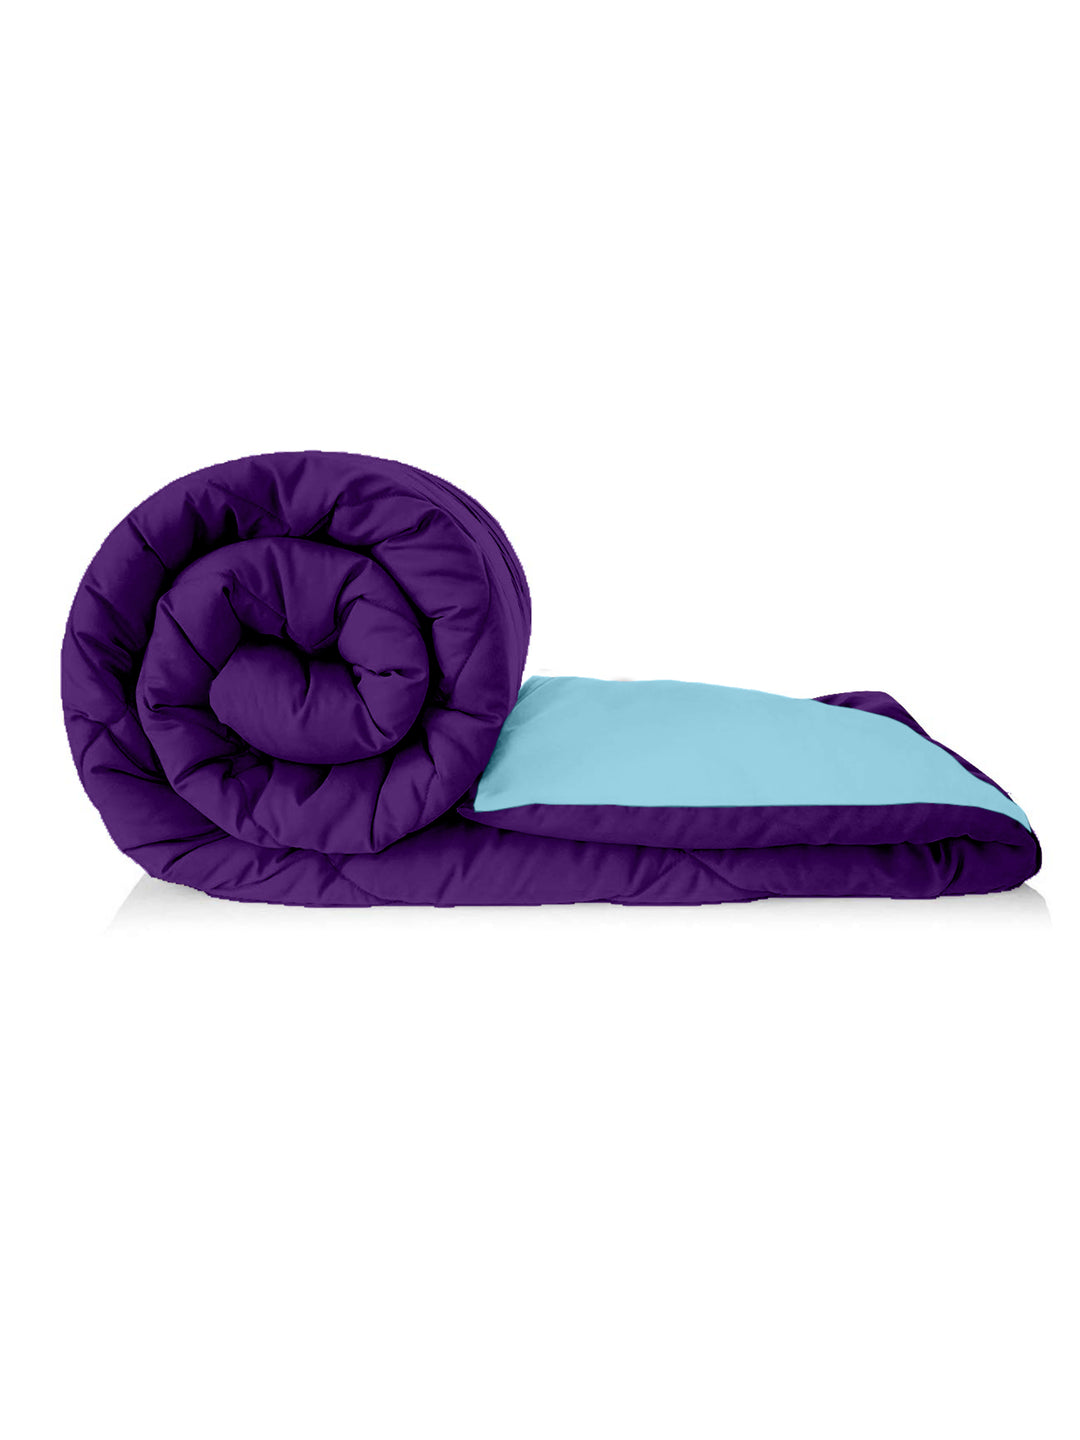 250GMS Reversible Double Bed King Size Comforter; 90x100 Inches; Aqua & Purple